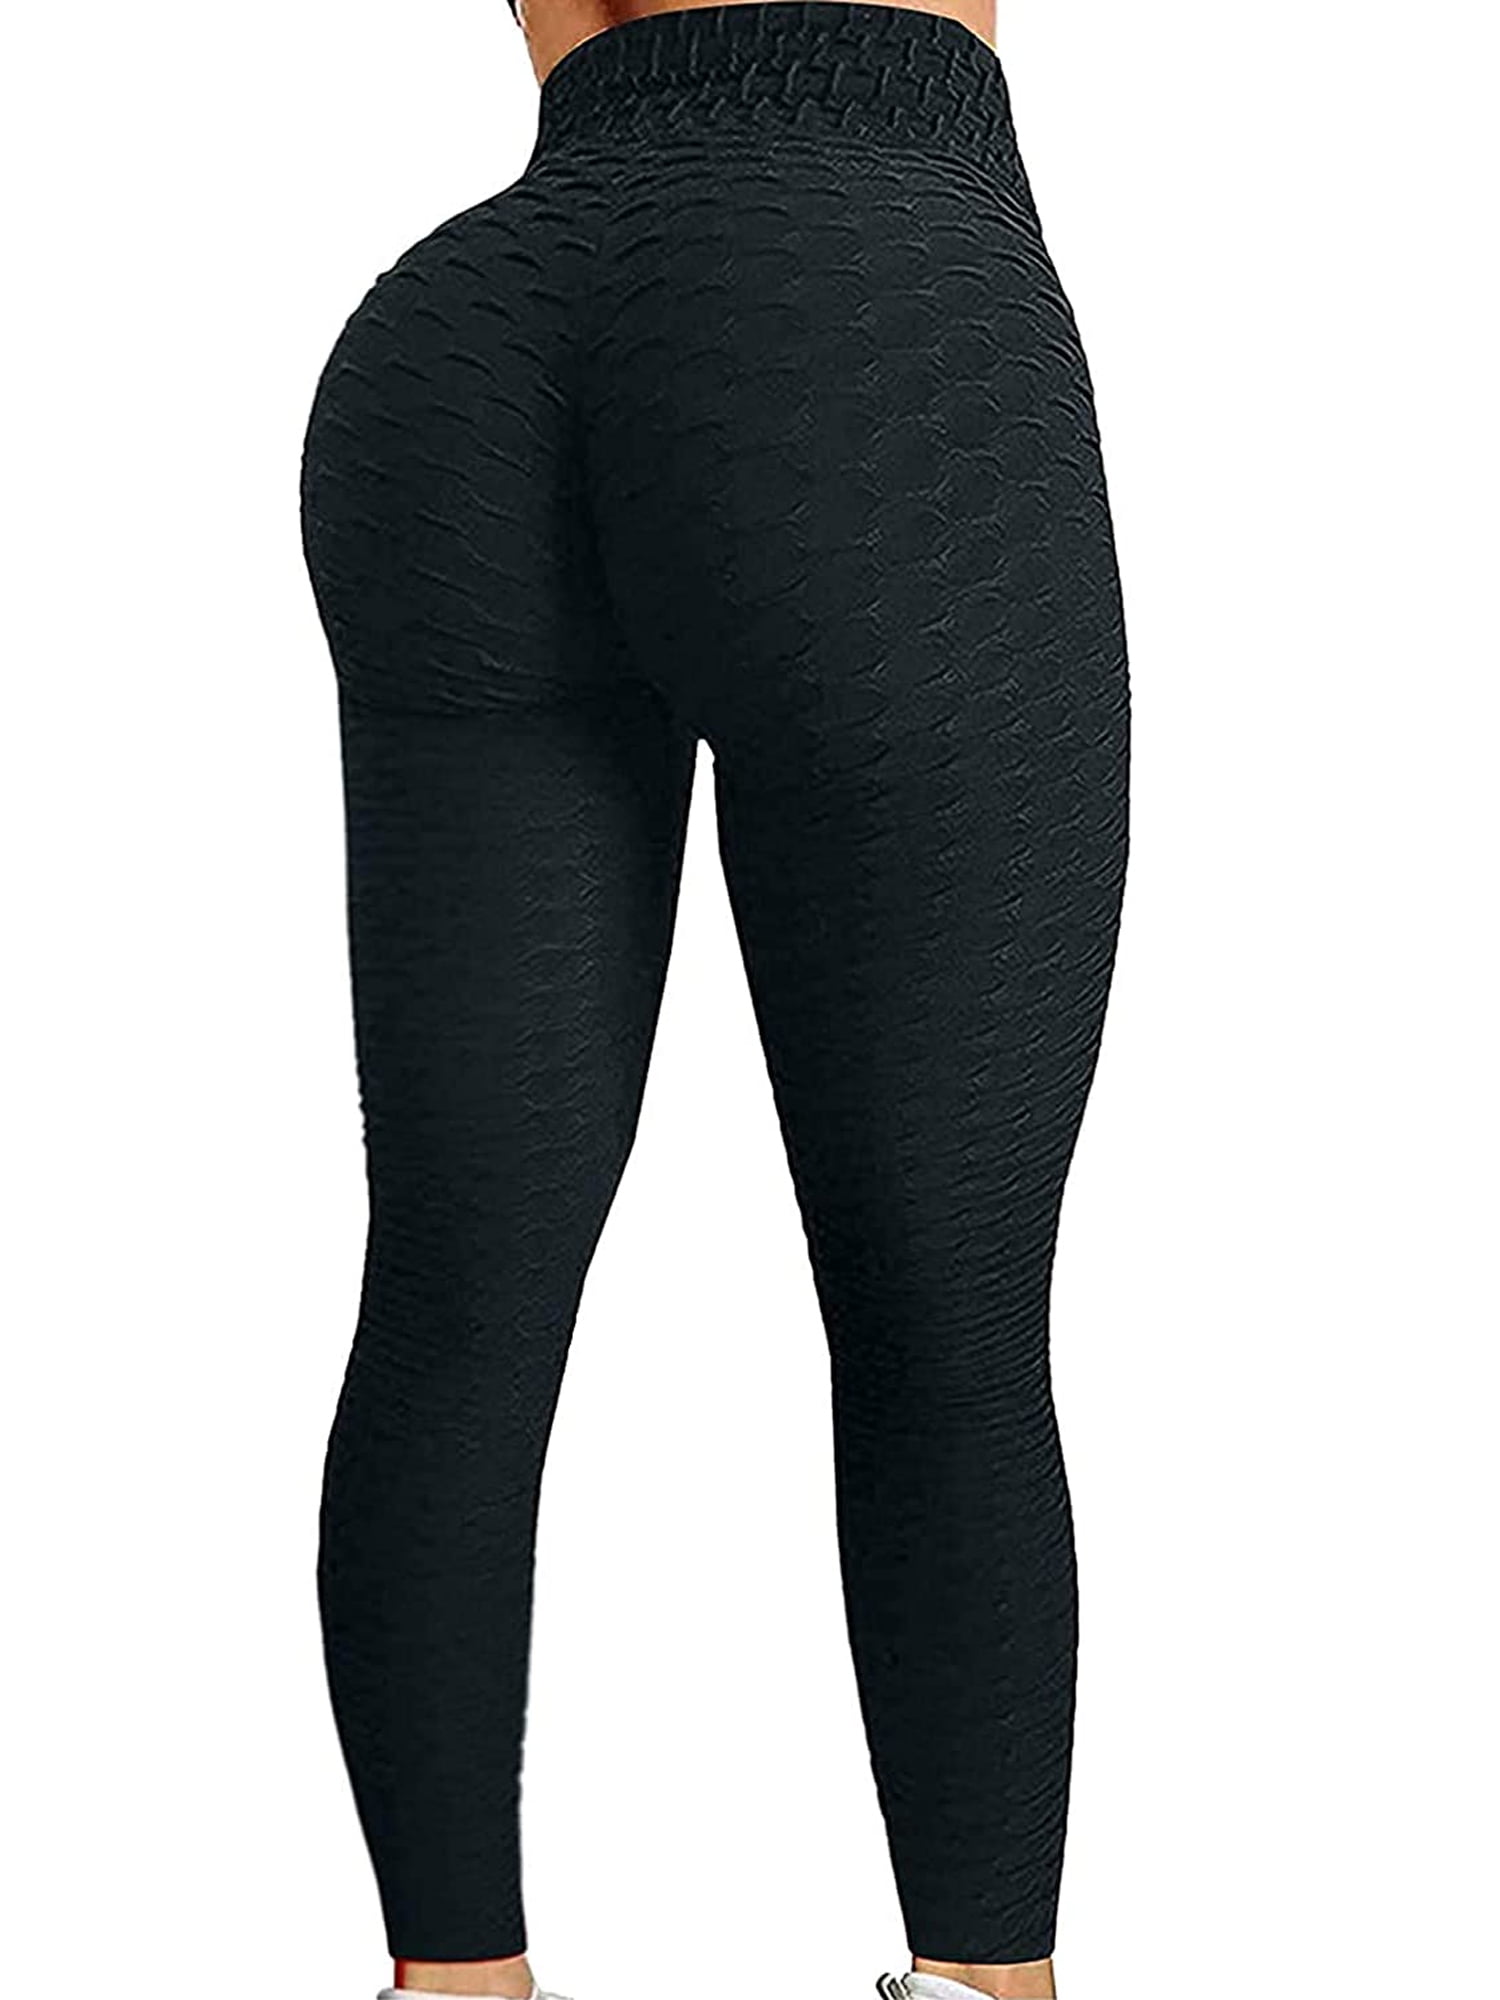 Canrulo Women Booty Legging Yoga Pants Bubble Butt Lifting Workout Tights  Black L